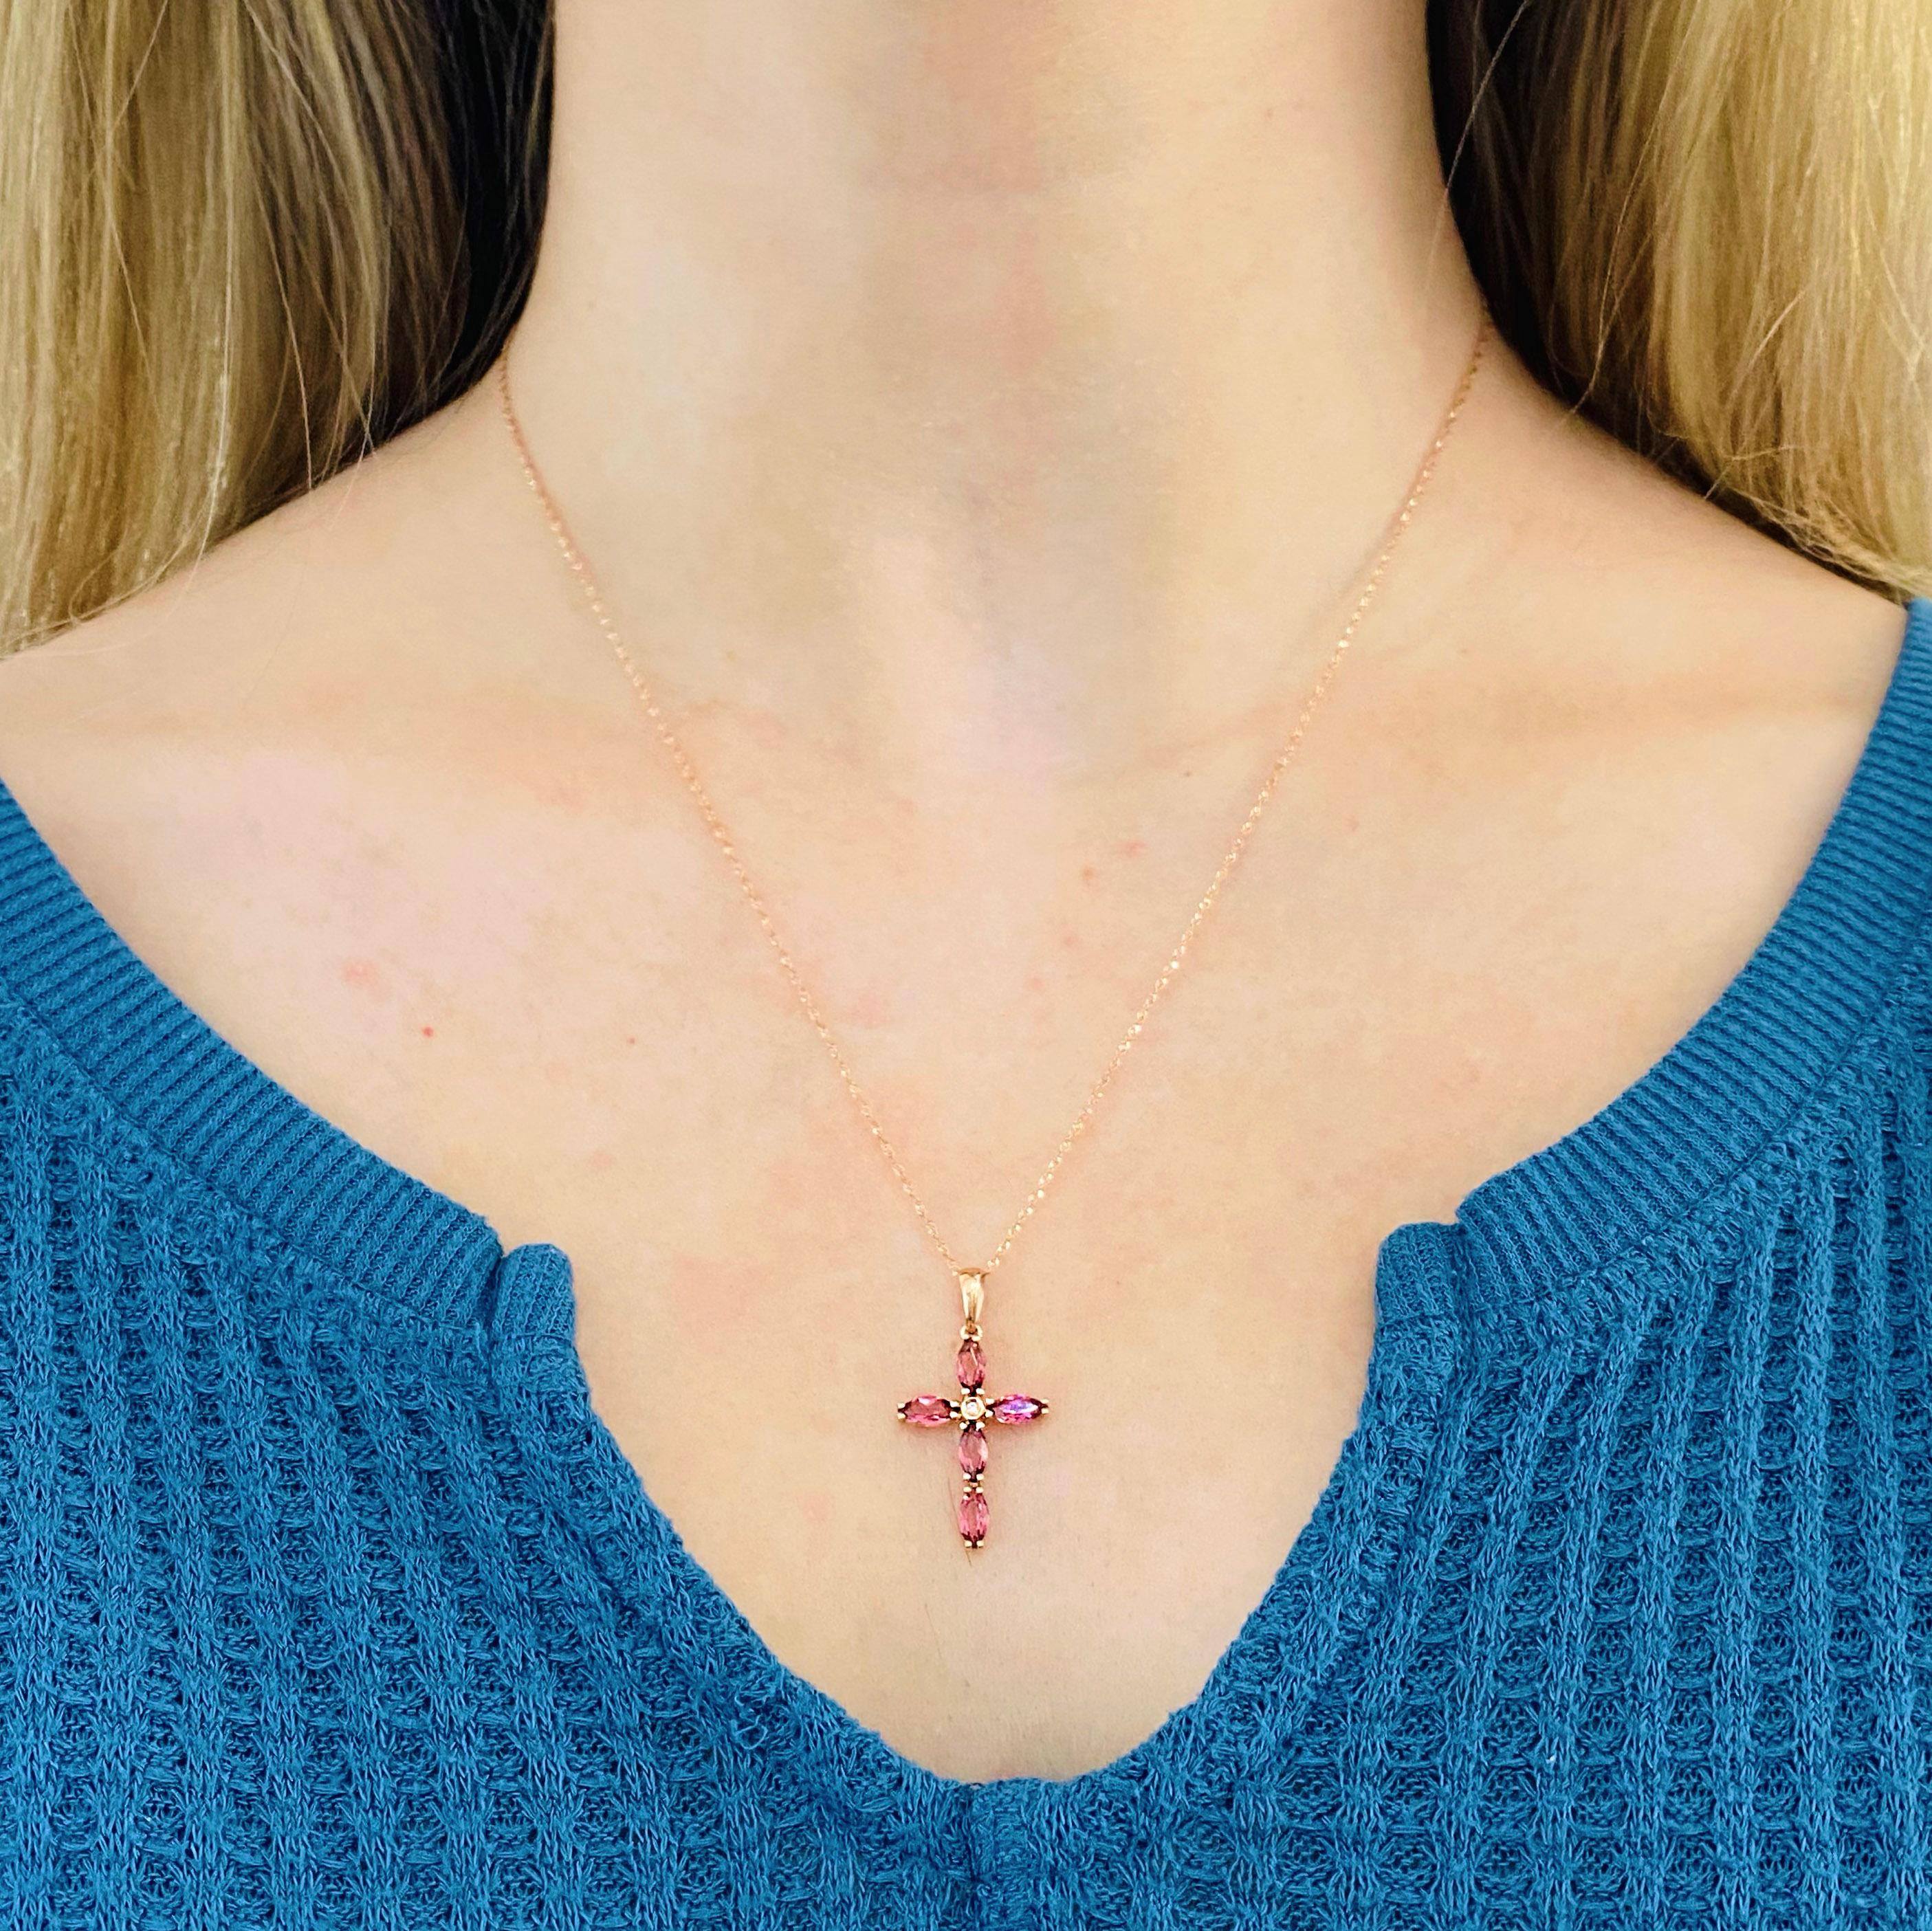 This stunningly beautiful cross made of bright pink stones set in polished 14k rose gold and accented with a bright white diamond provides a look that is very modern yet classic! This necklace is very fashionable and can add a touch of style to any